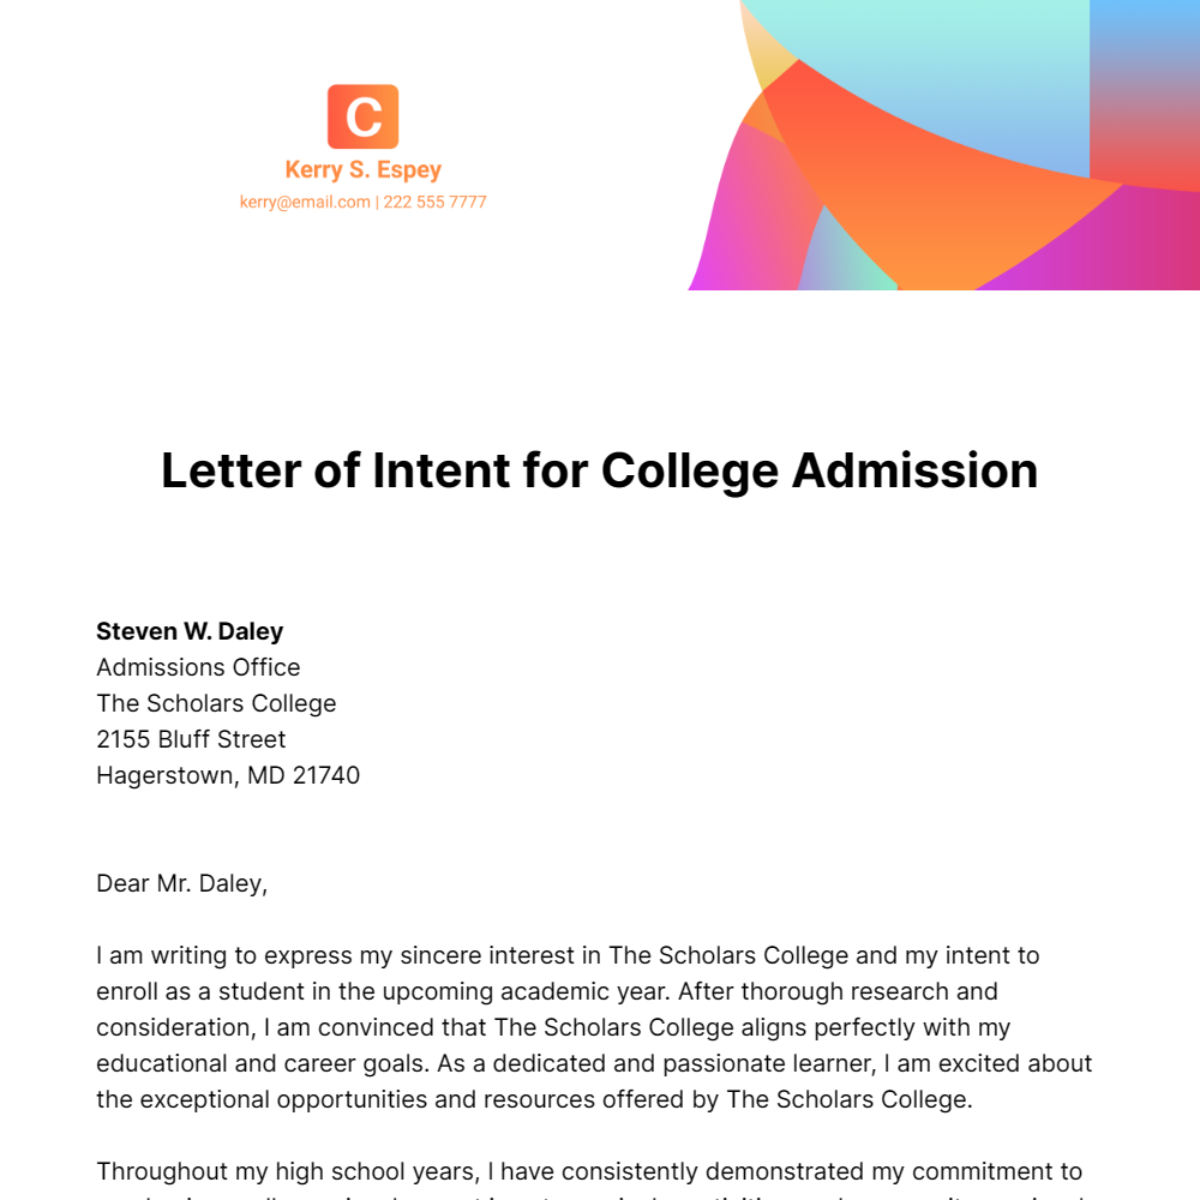 Letter of Intent for College Admission Template